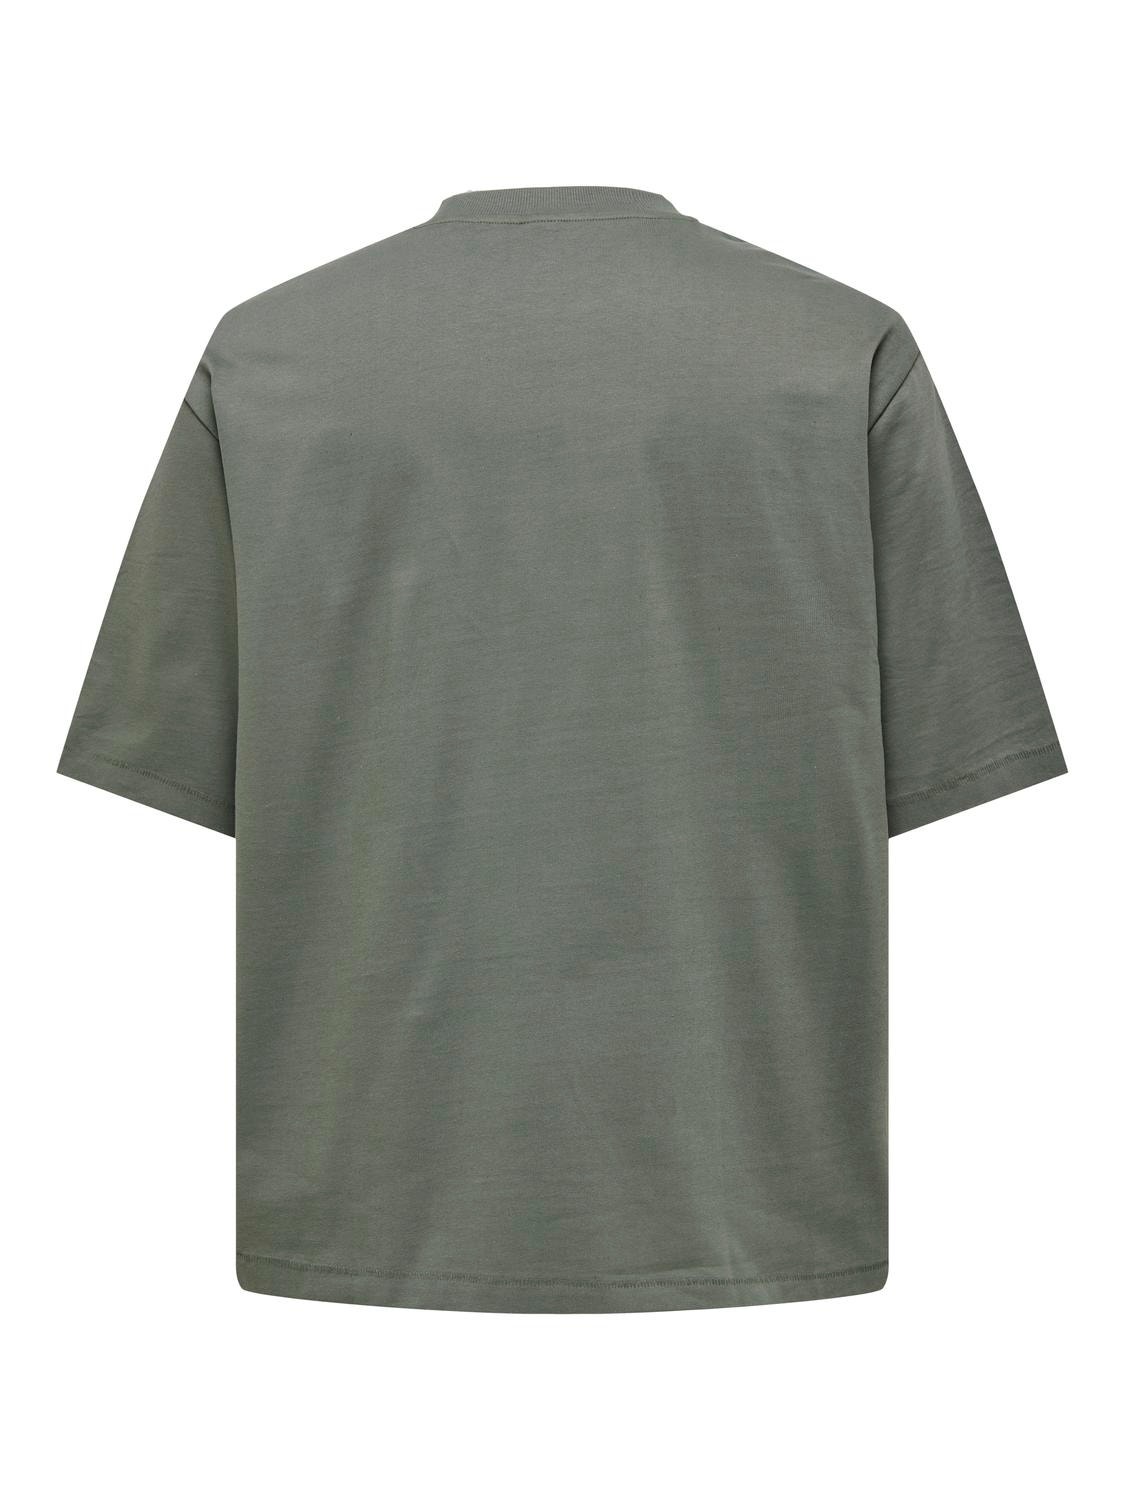 ONLY & SONS Oversize Fit Round Neck T-Shirt -Castor Gray - 22027787